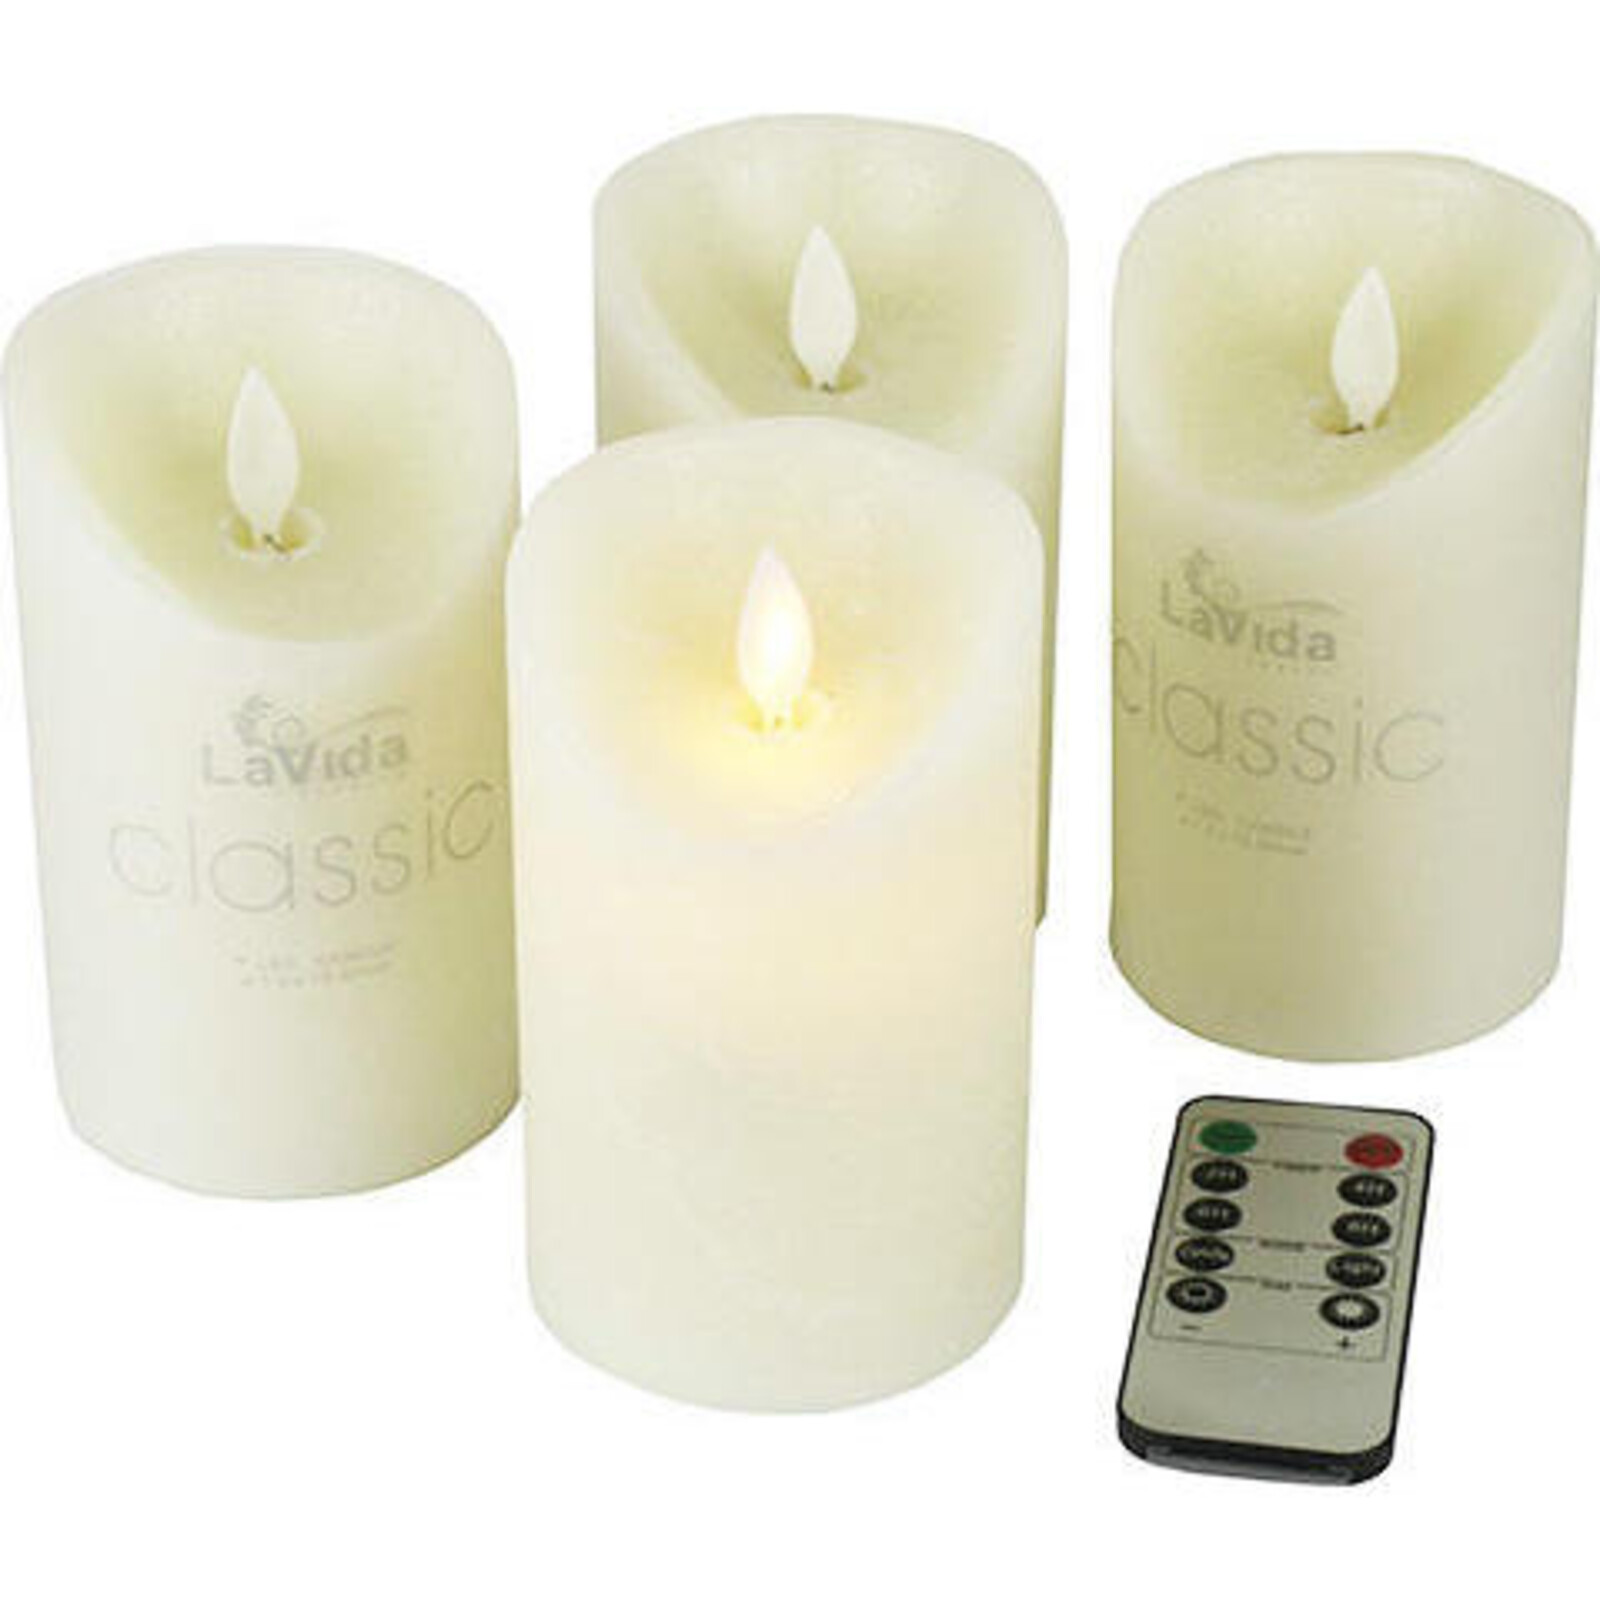 Flameless Candle Lrg S/4 w/ Remote